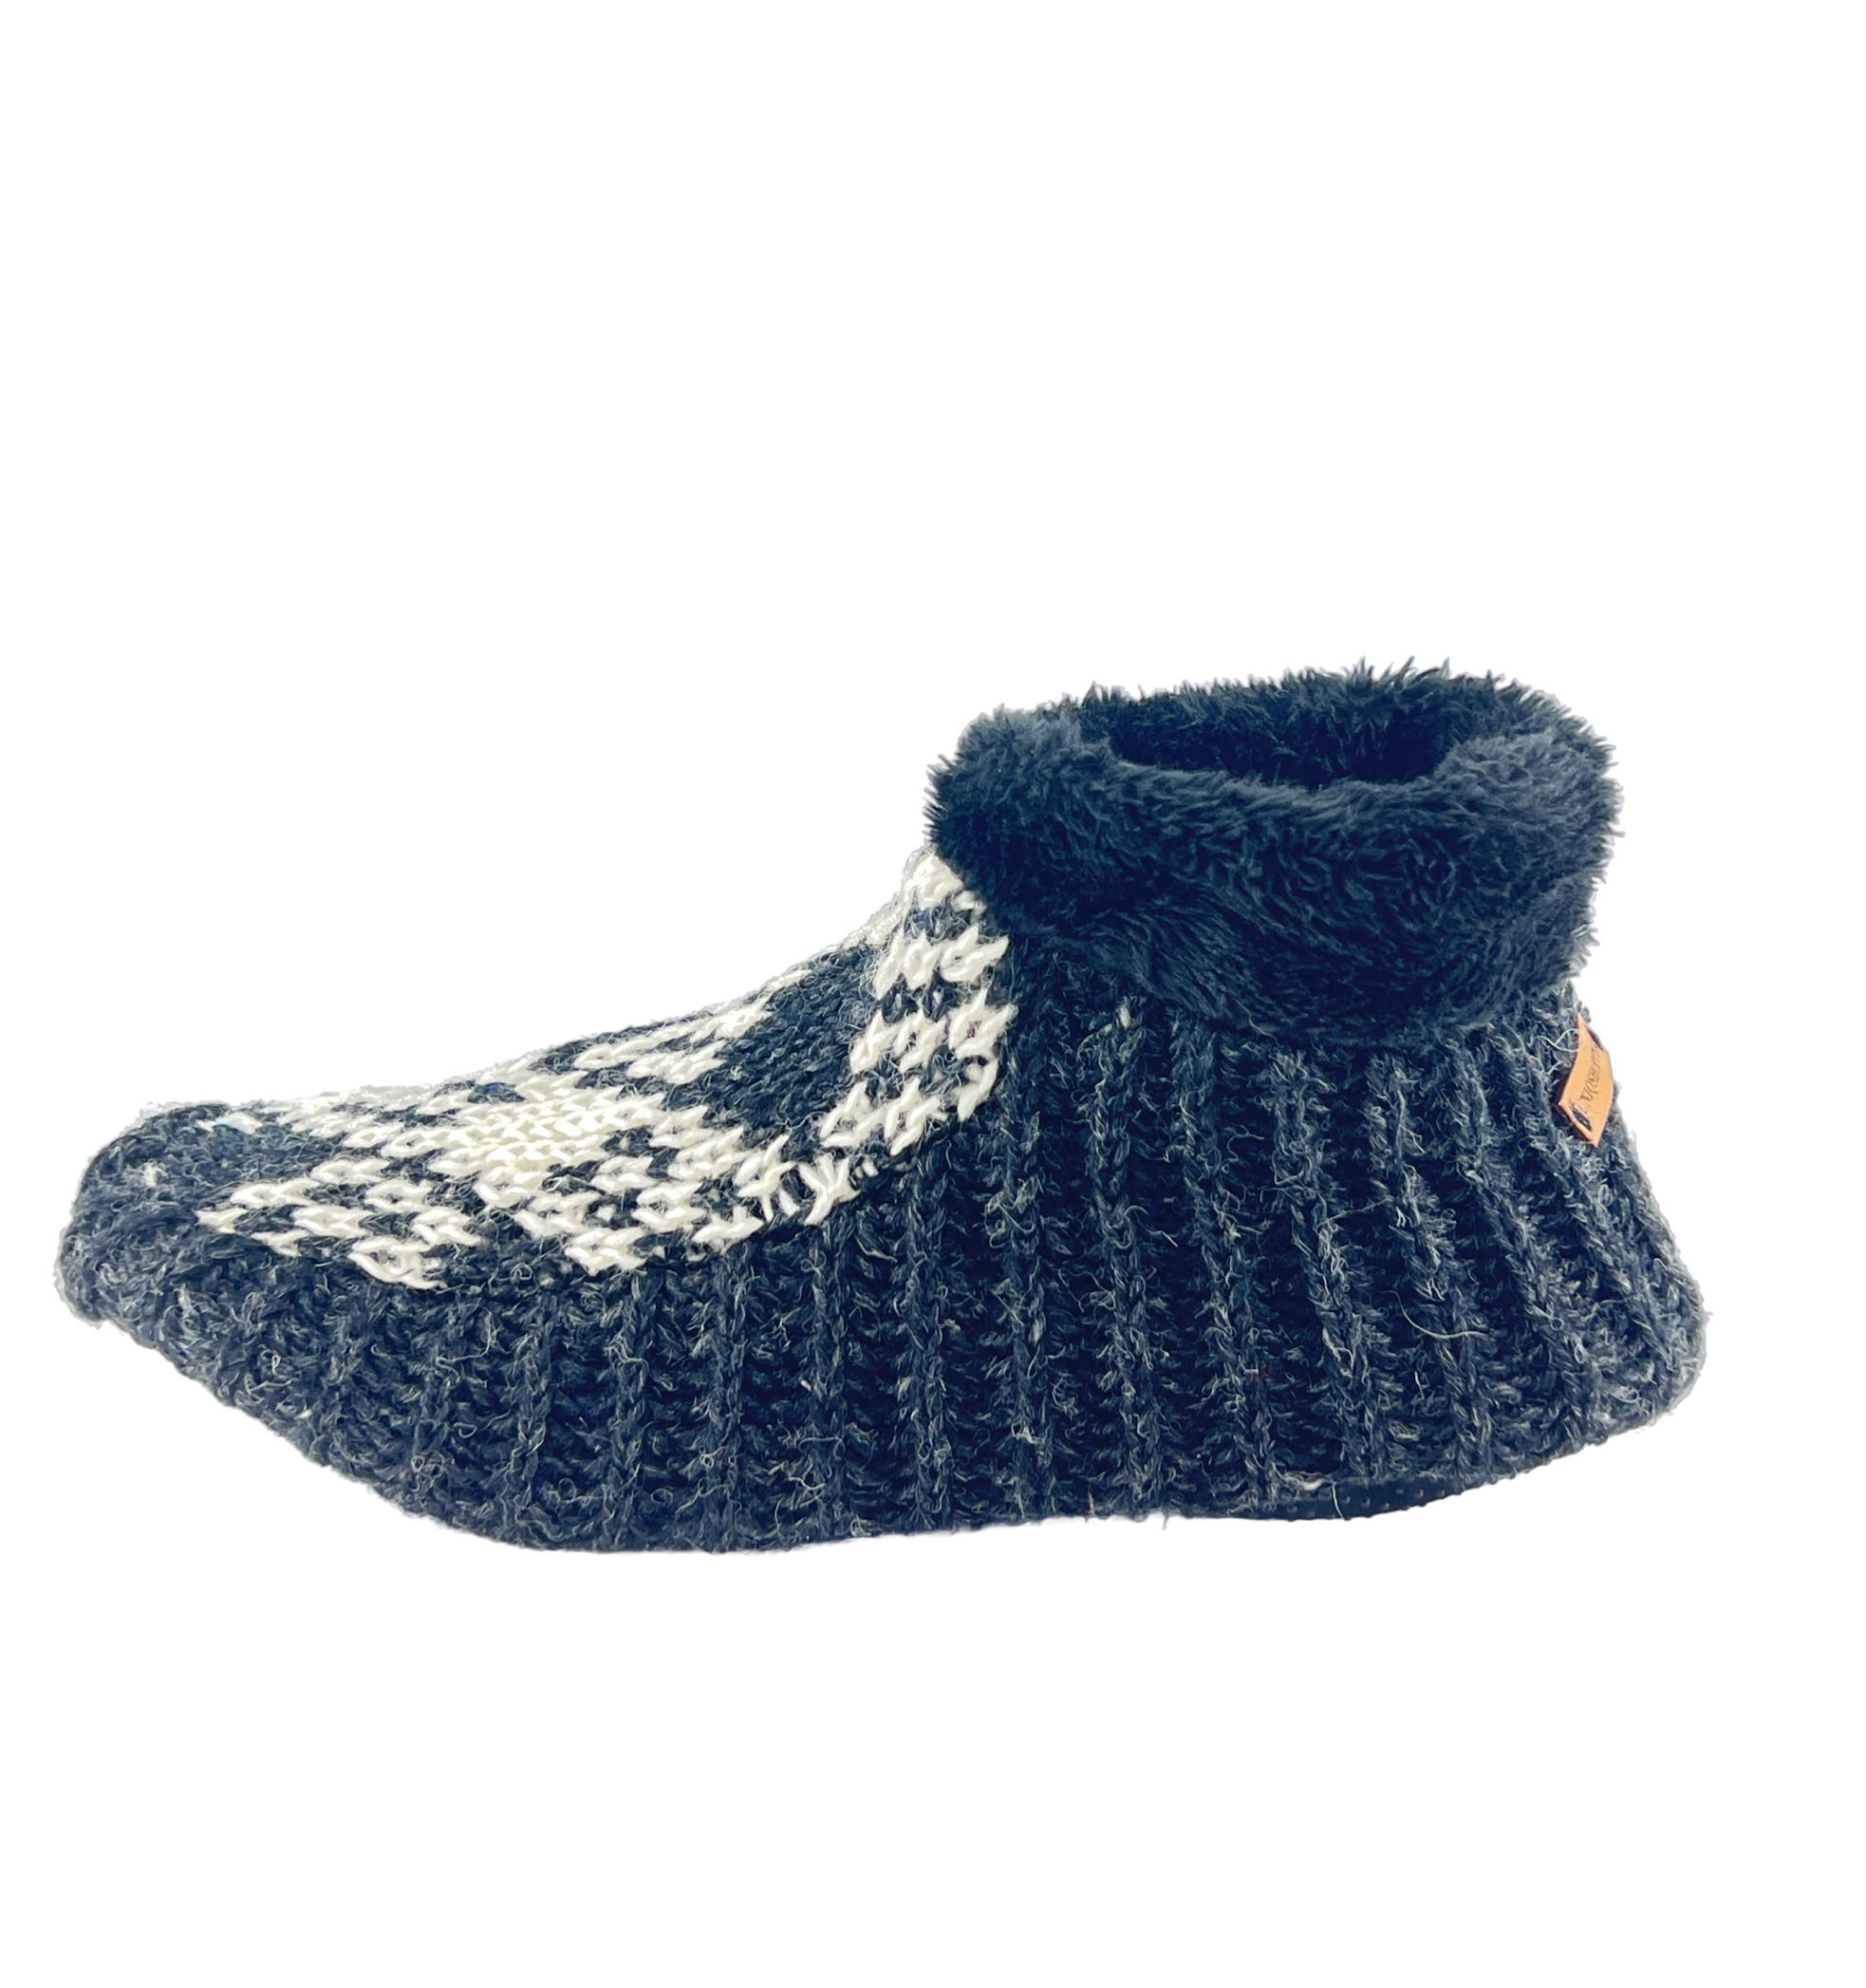 Anti-slip Woolen booties | Cute slippers |Cozy Wool Slippers for Home | Cute Ankle Length House Slippers for Men & Women| Fur slippers